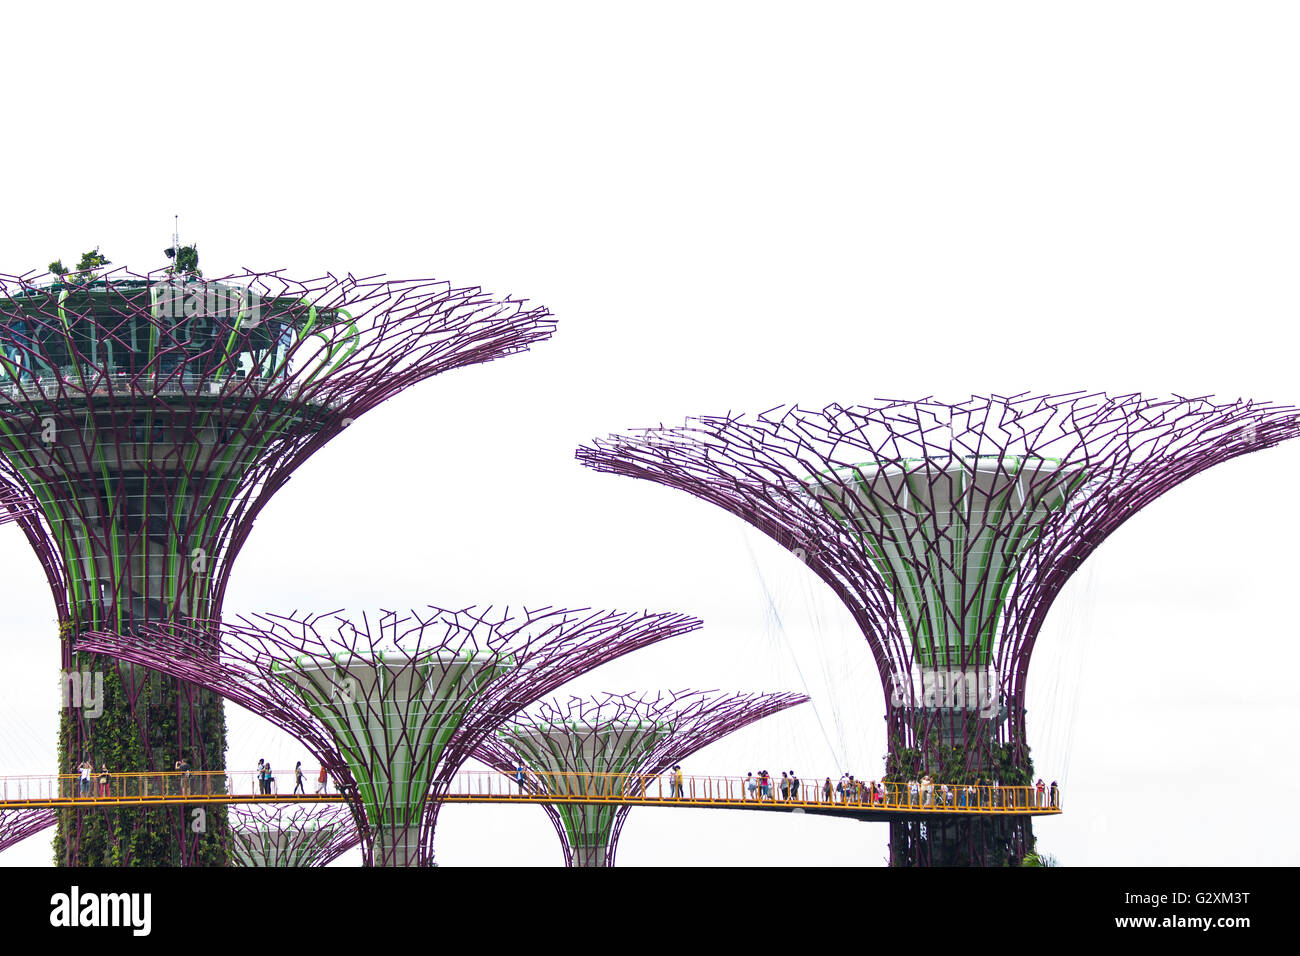 SINGAPORE - AUGUST 5, 2014: Supertree Grove at Gardens by the Bay in Singapore. Supertrees are tree-like structures with heights Stock Photo